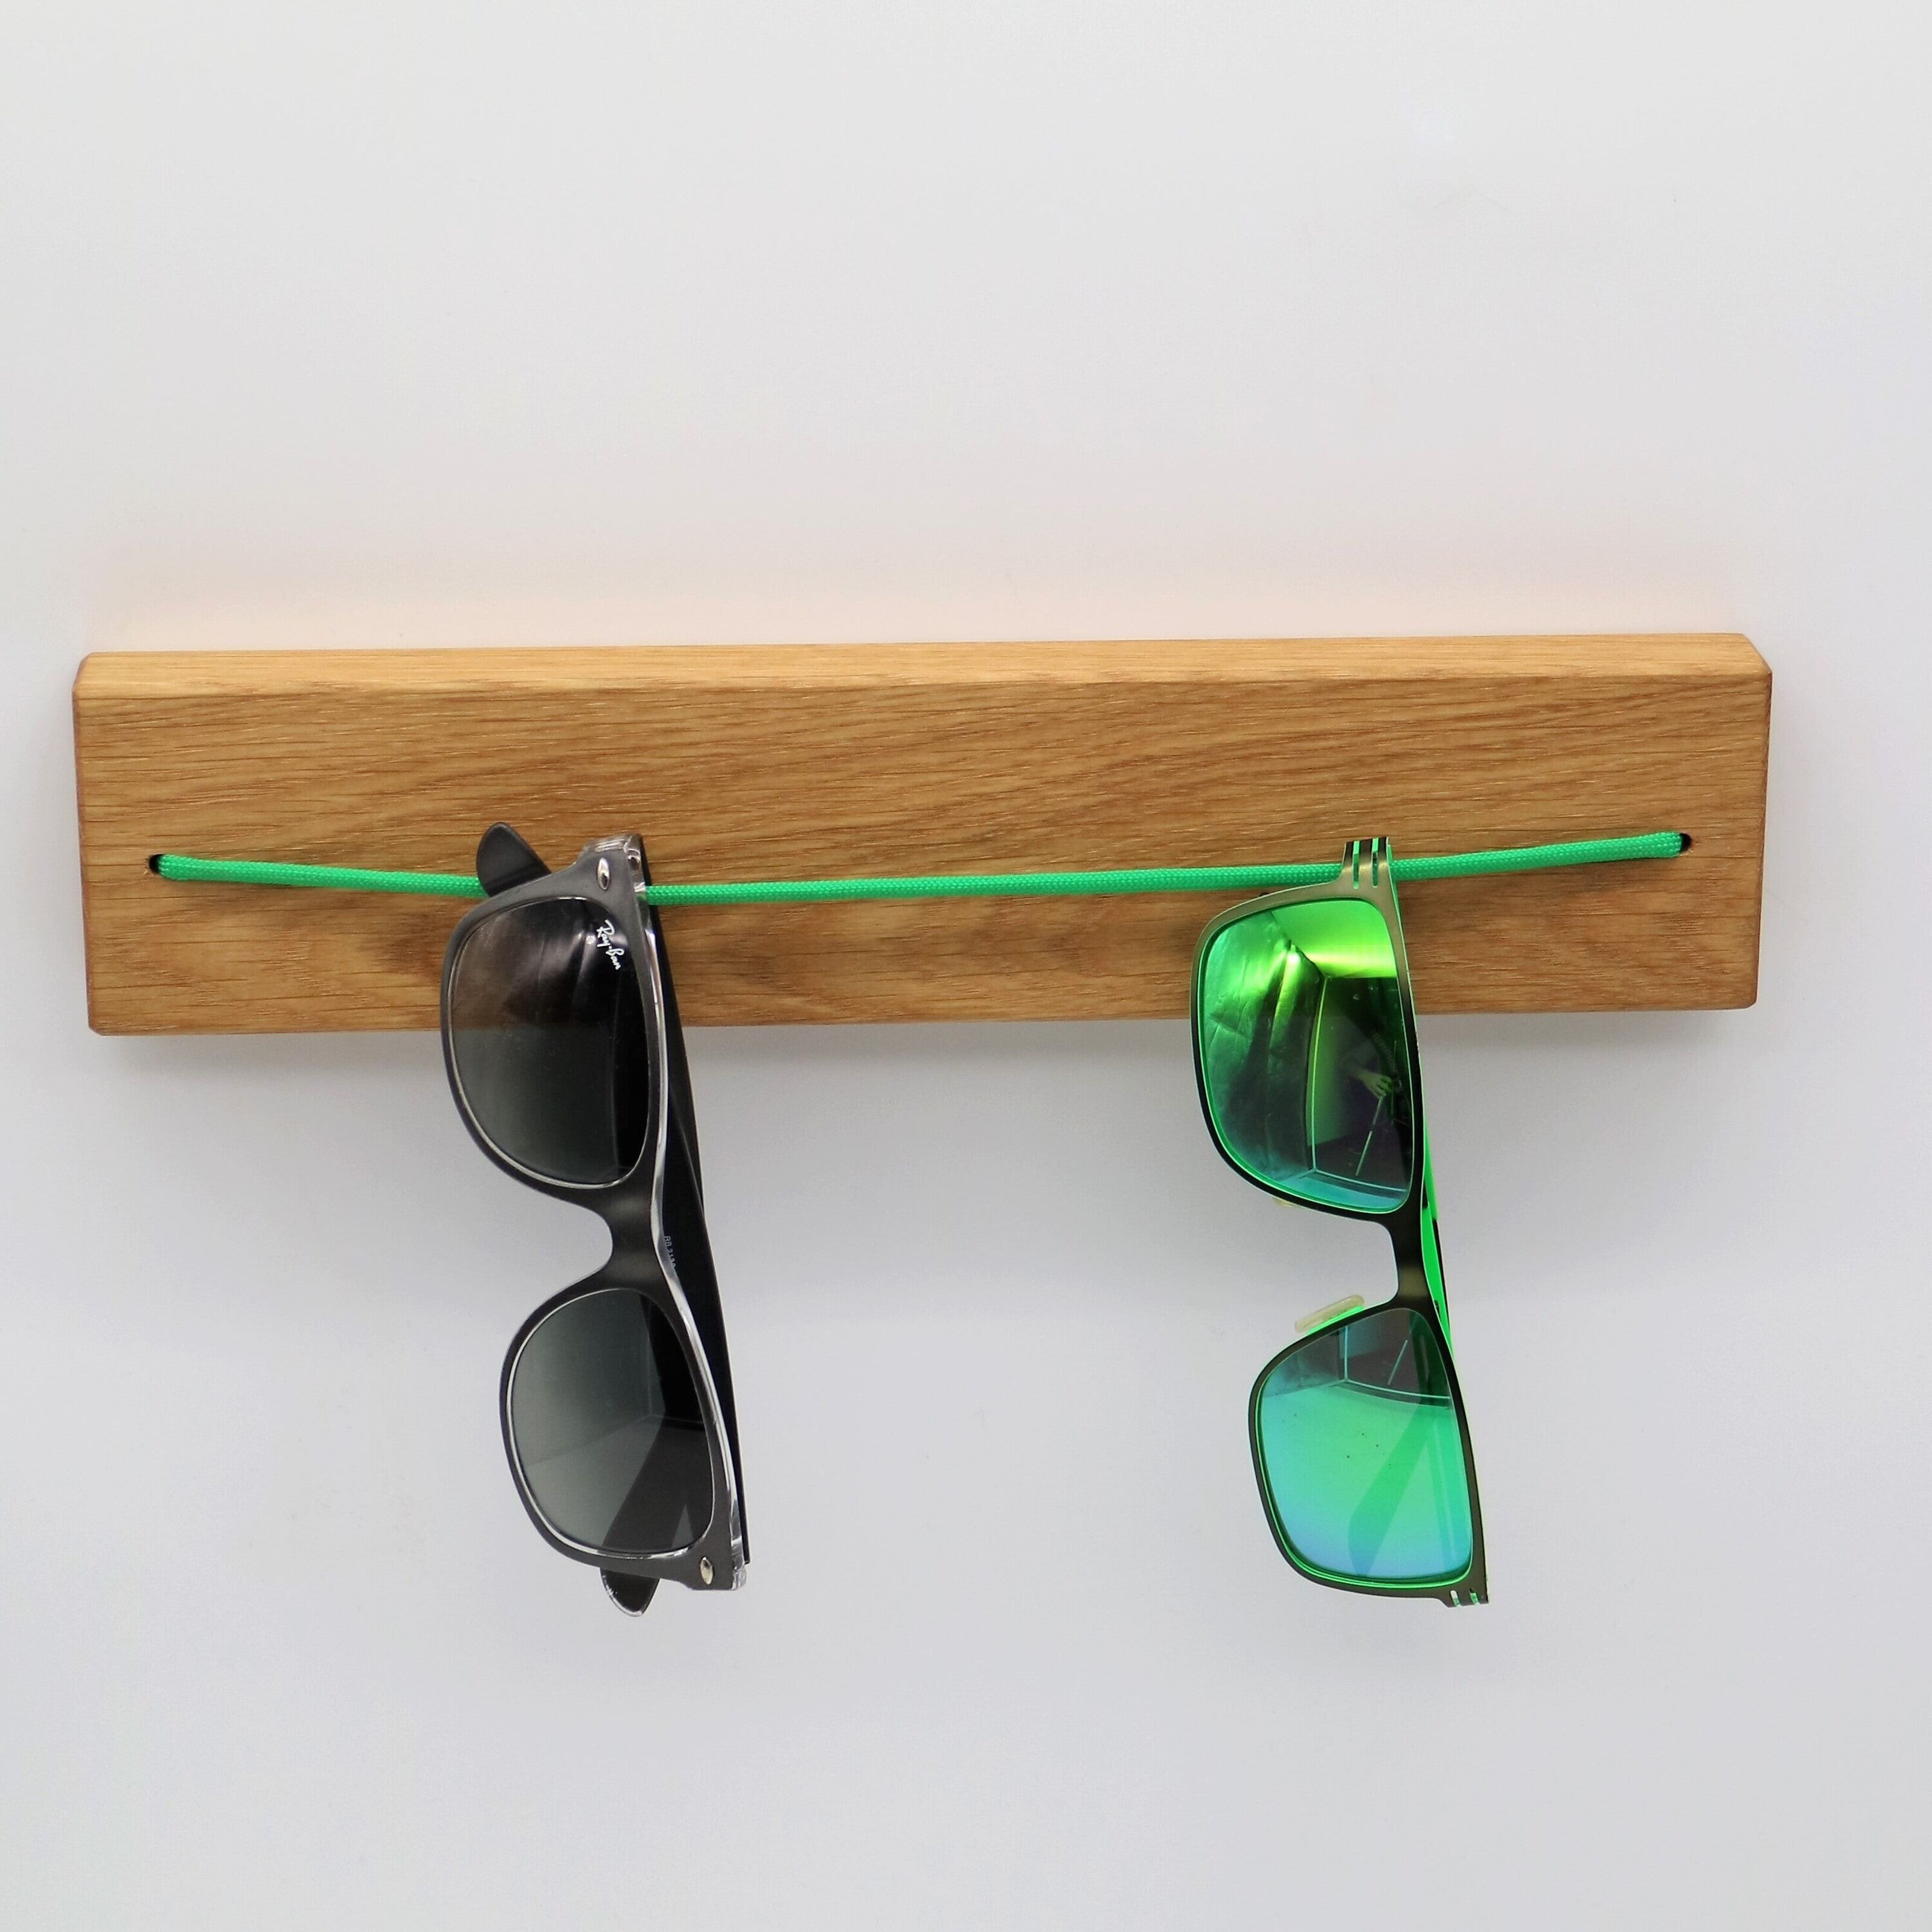 Buy wholesale Spectacle holder SPECULA - oak green cord - screws